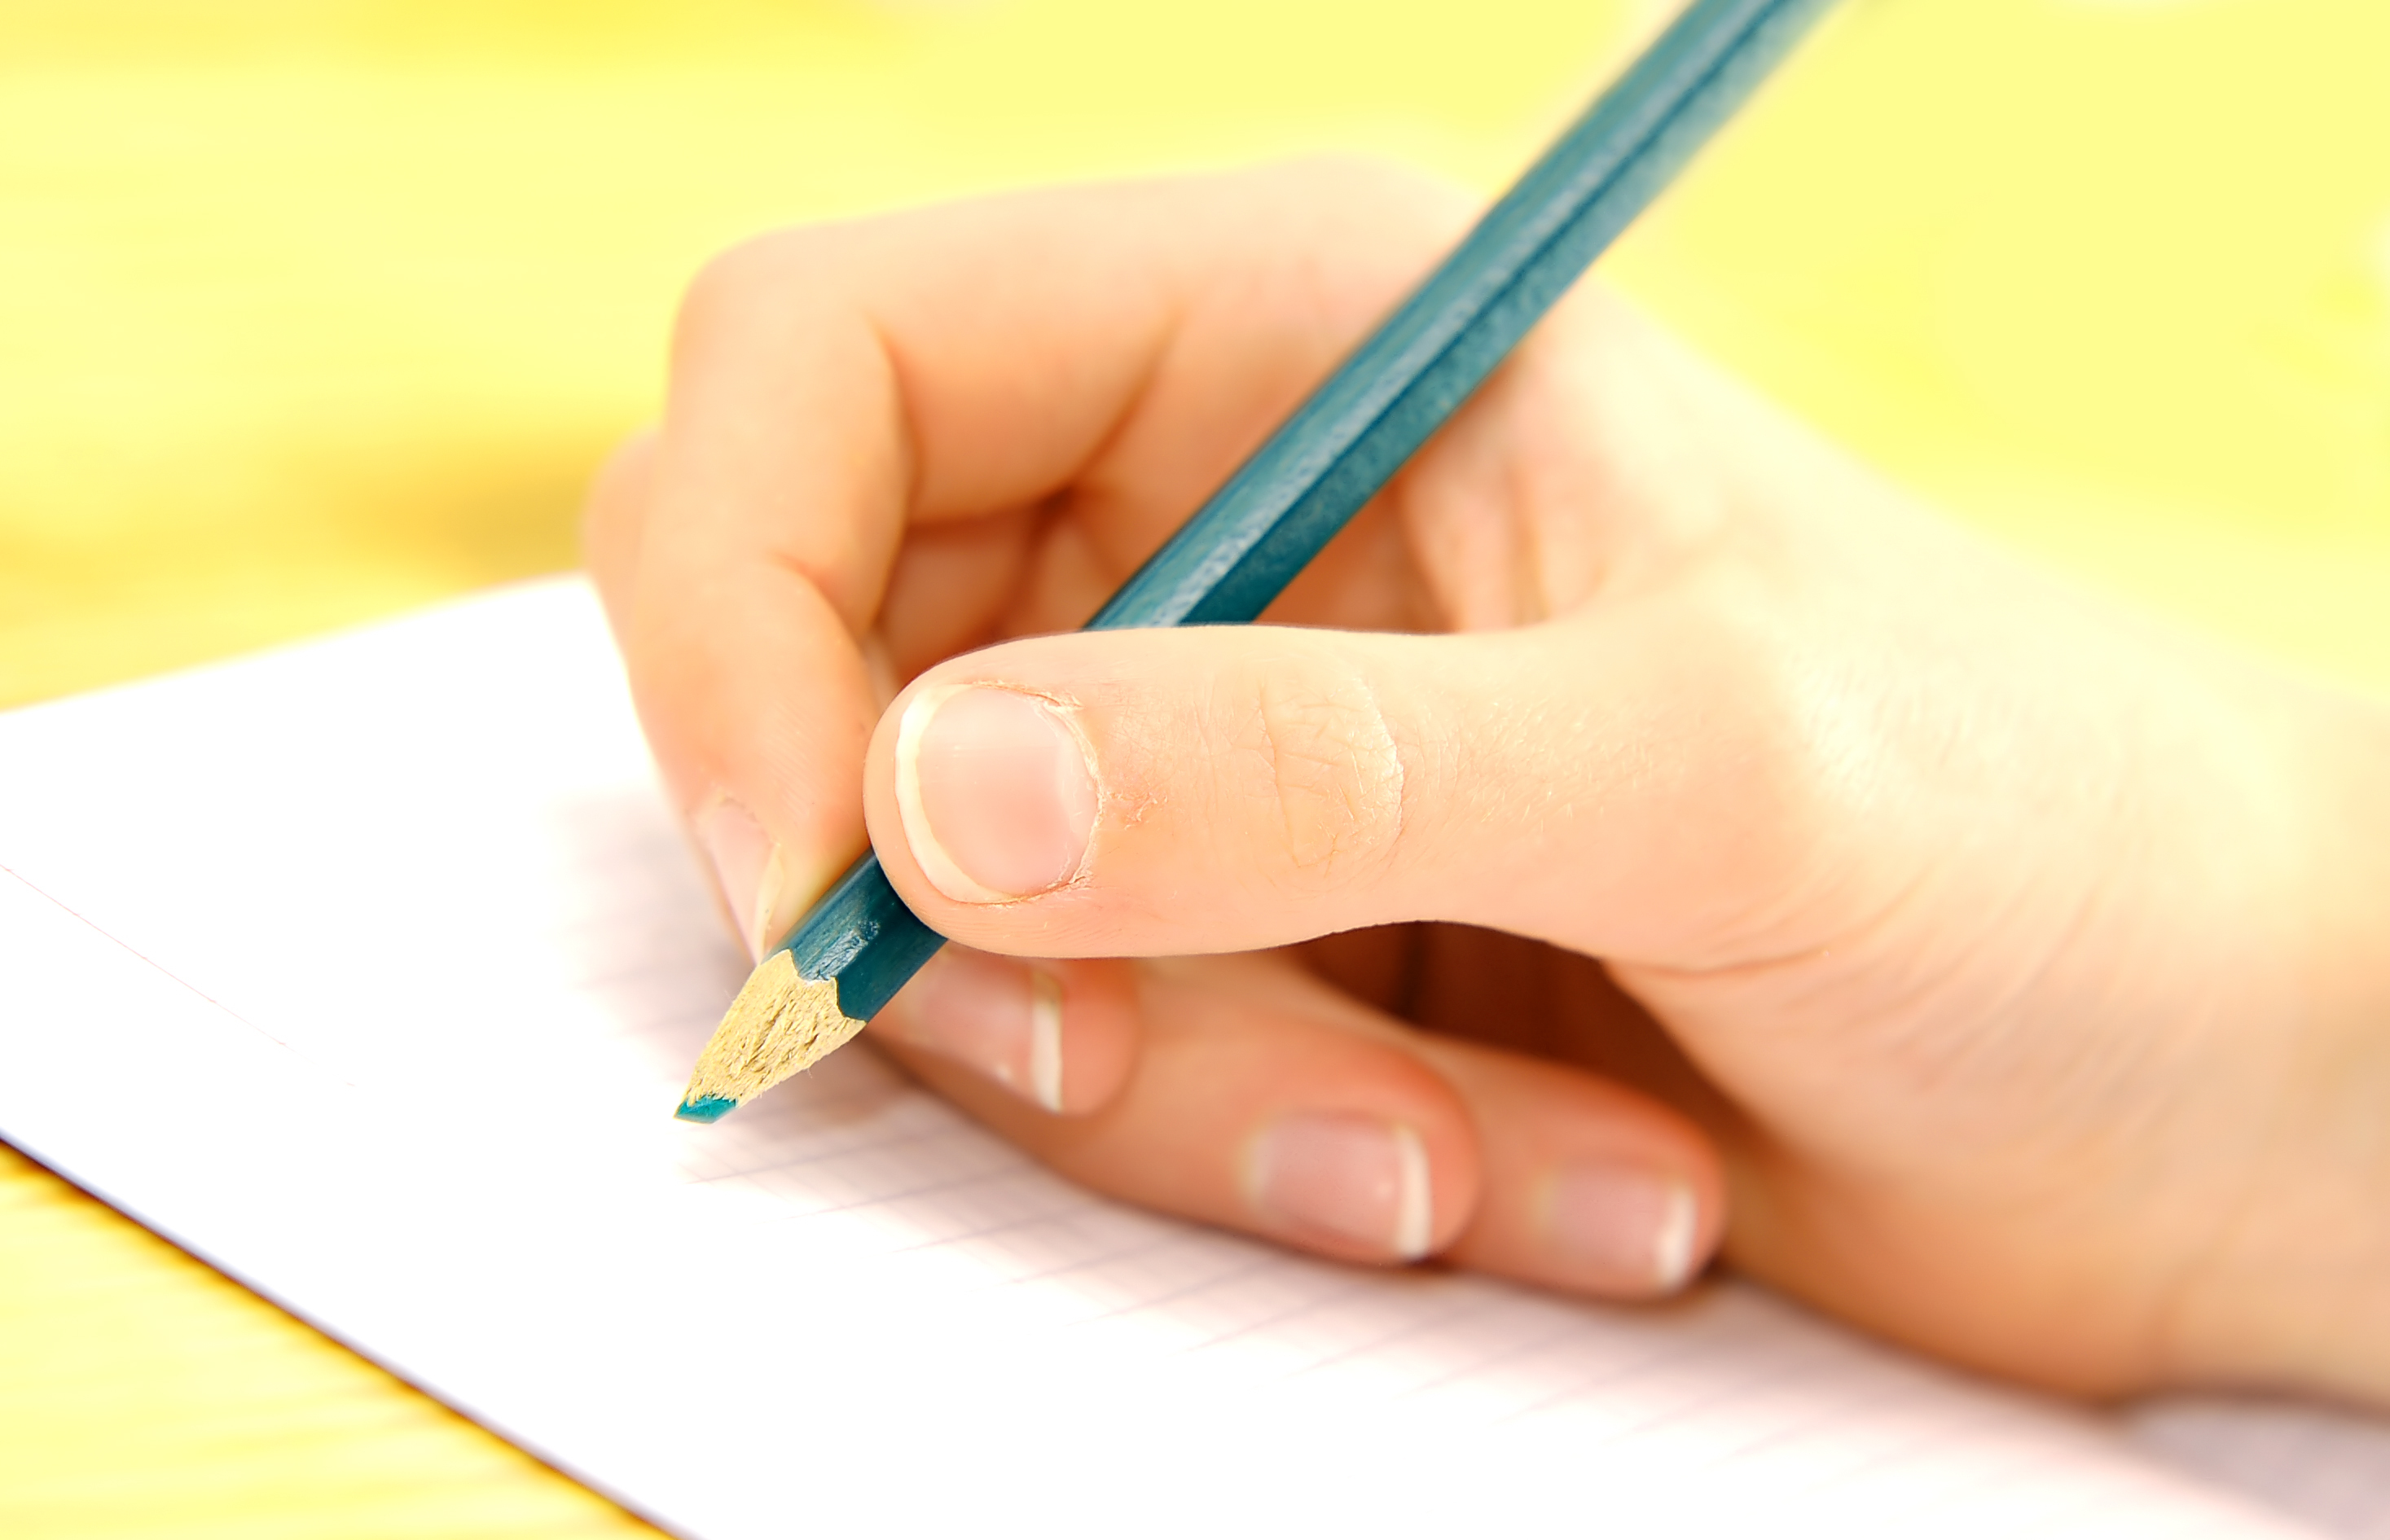 Dysgraphia: Improving Writing by Putting Pencil to Paper